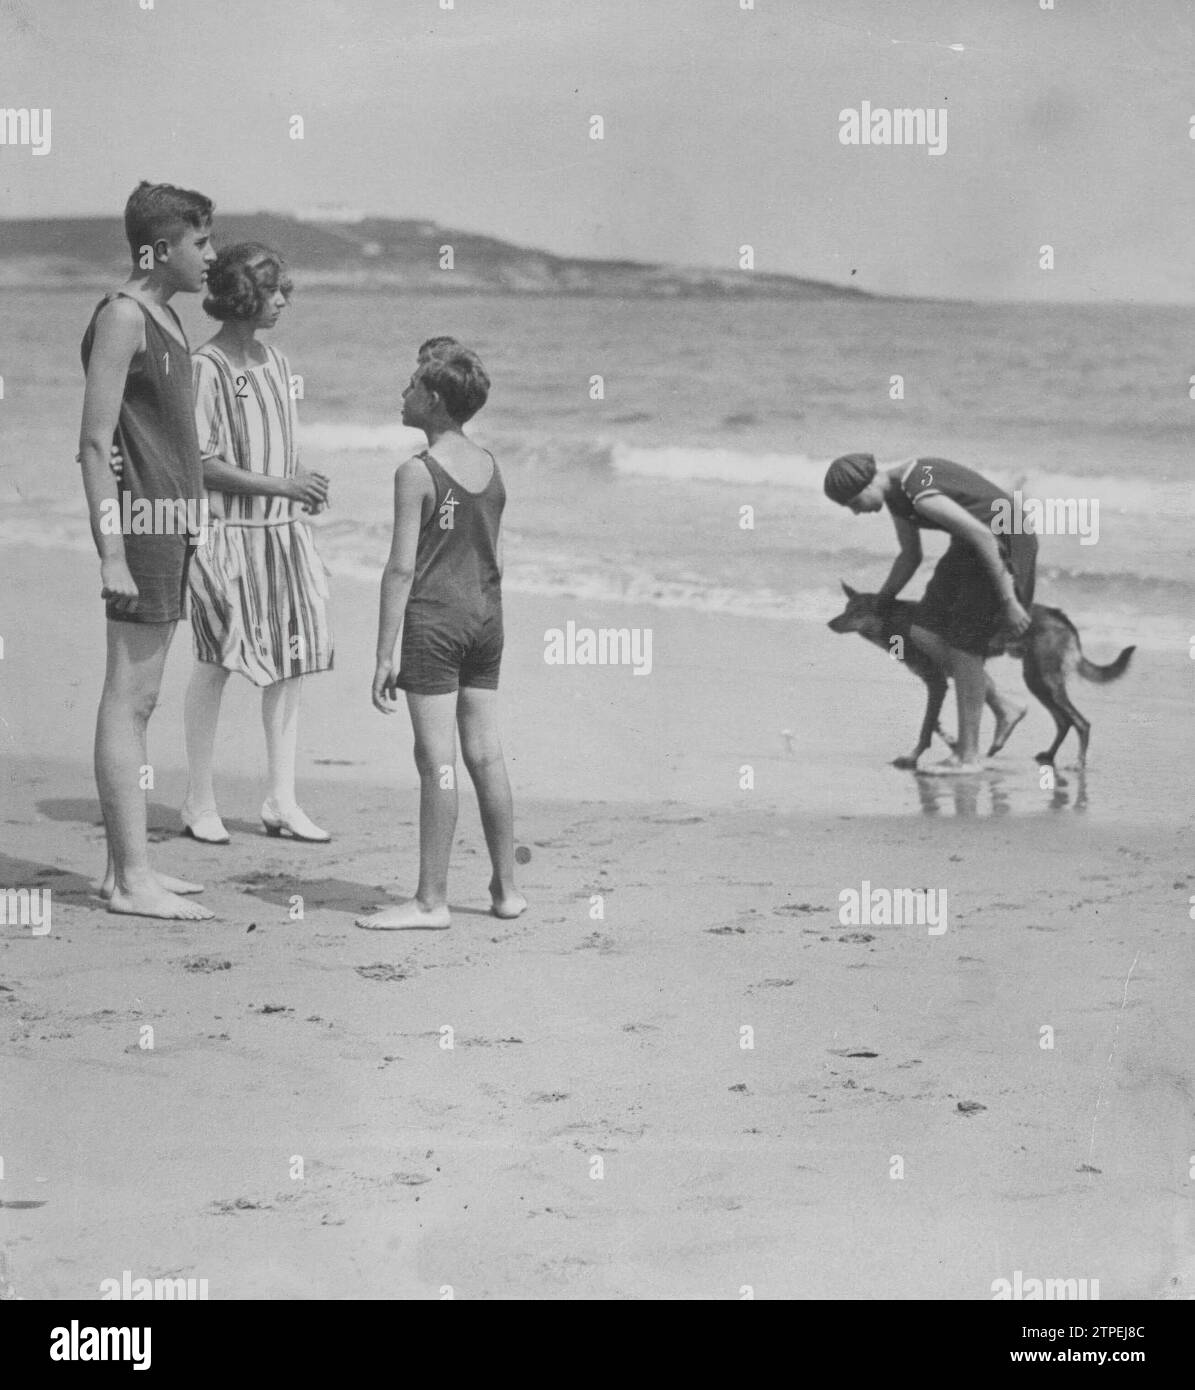 07/31/1923. Summer vacation of the royal family in Santander. In the image the Infants don Jaime (1), doña Beatriz (2), doña Cristina (3) and don Juan (4). Credit: Album / Archivo ABC Stock Photo